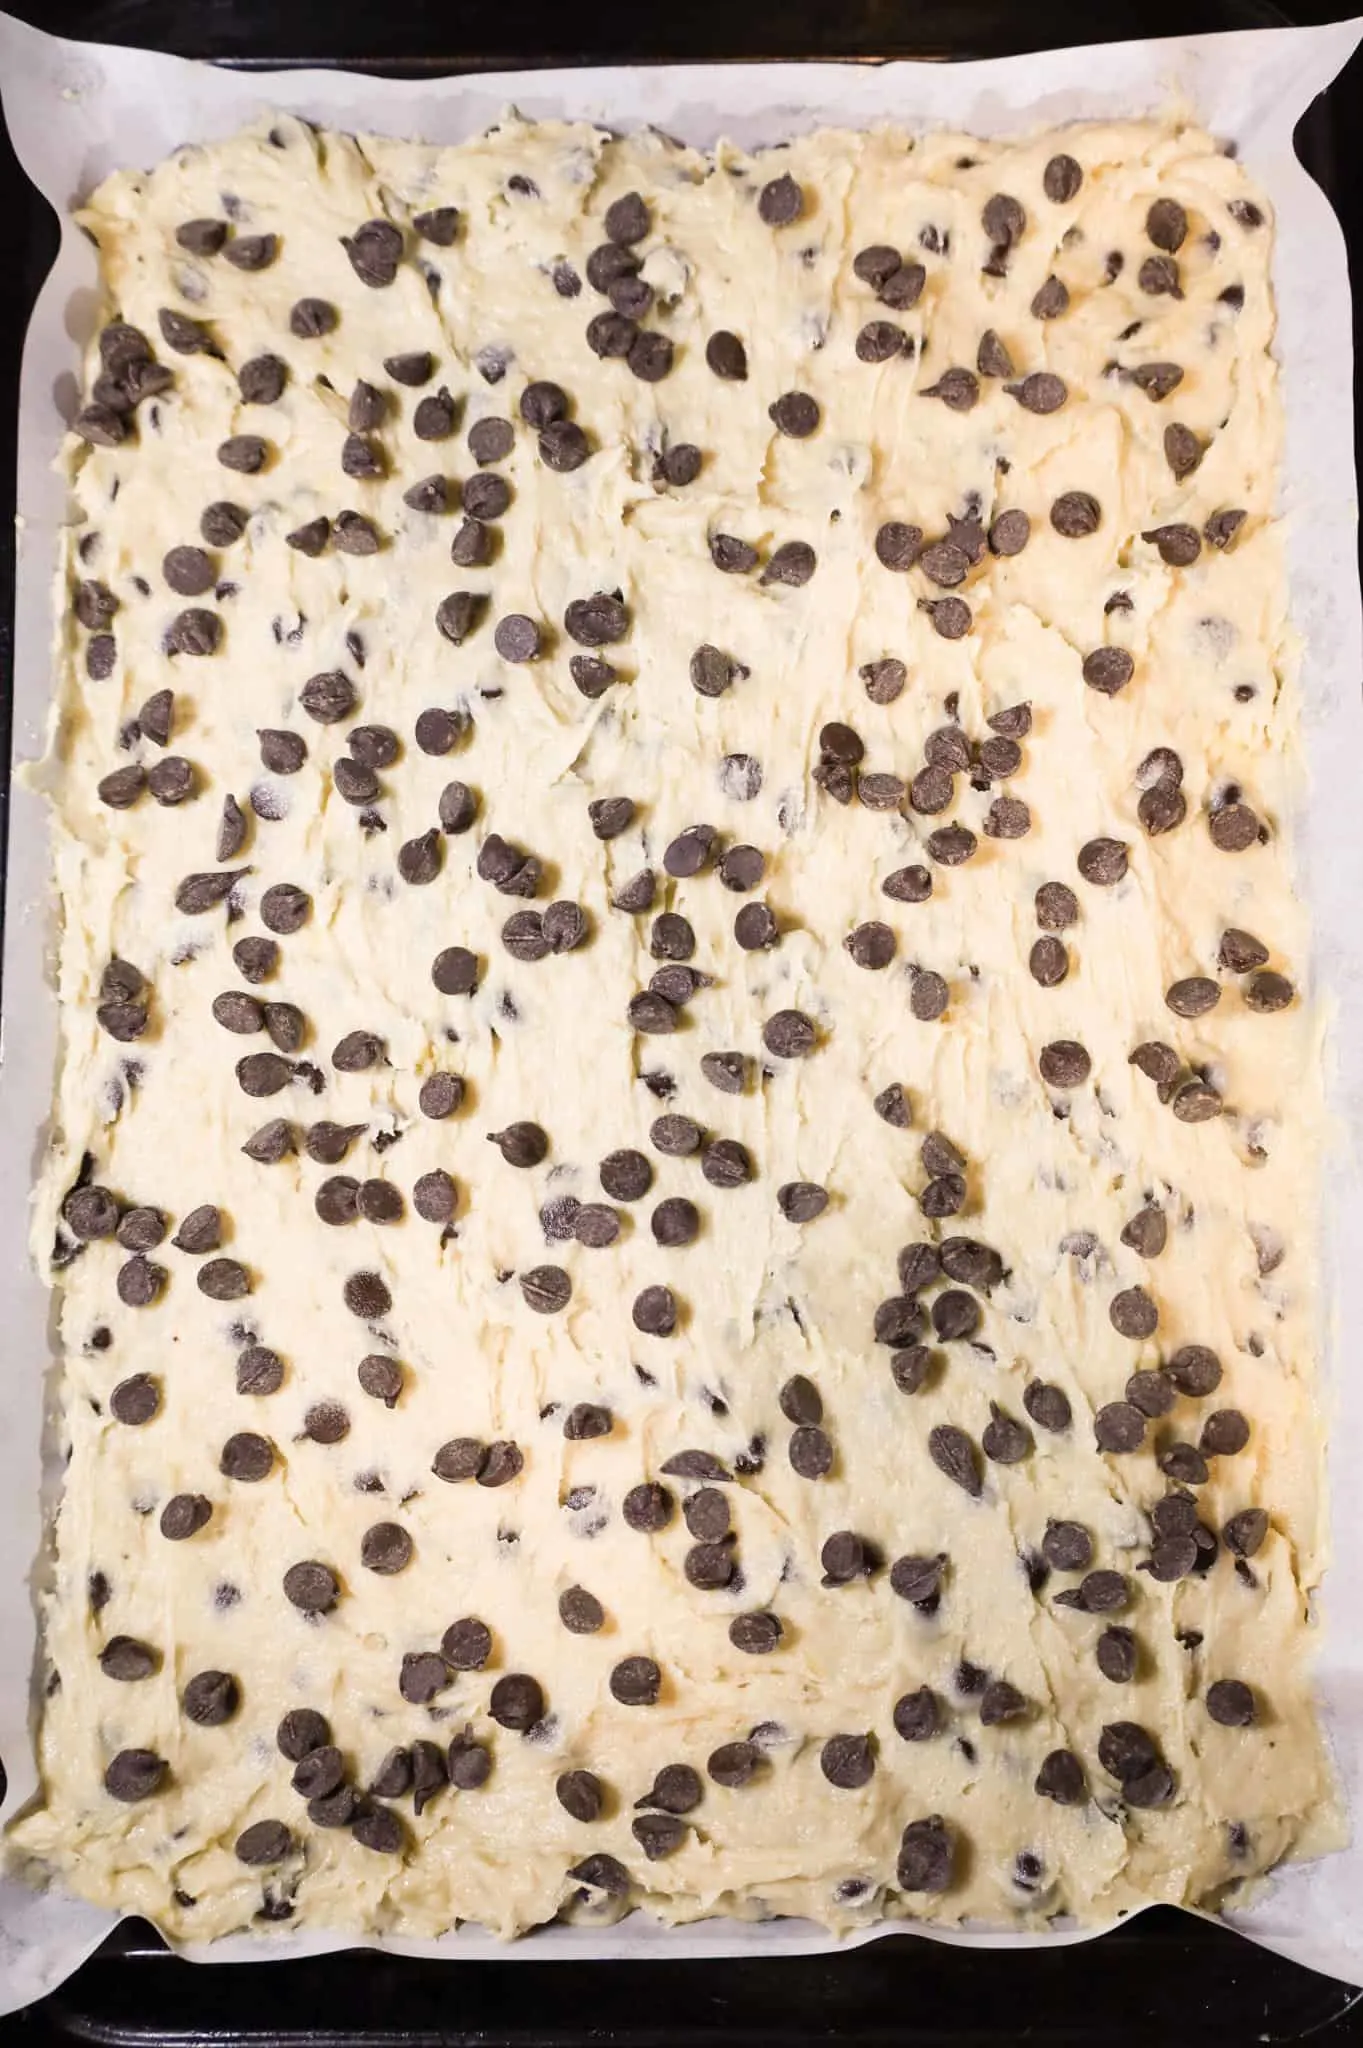 semi sweet chocolate chips on top of banana batter in a parchment lined baking sheet